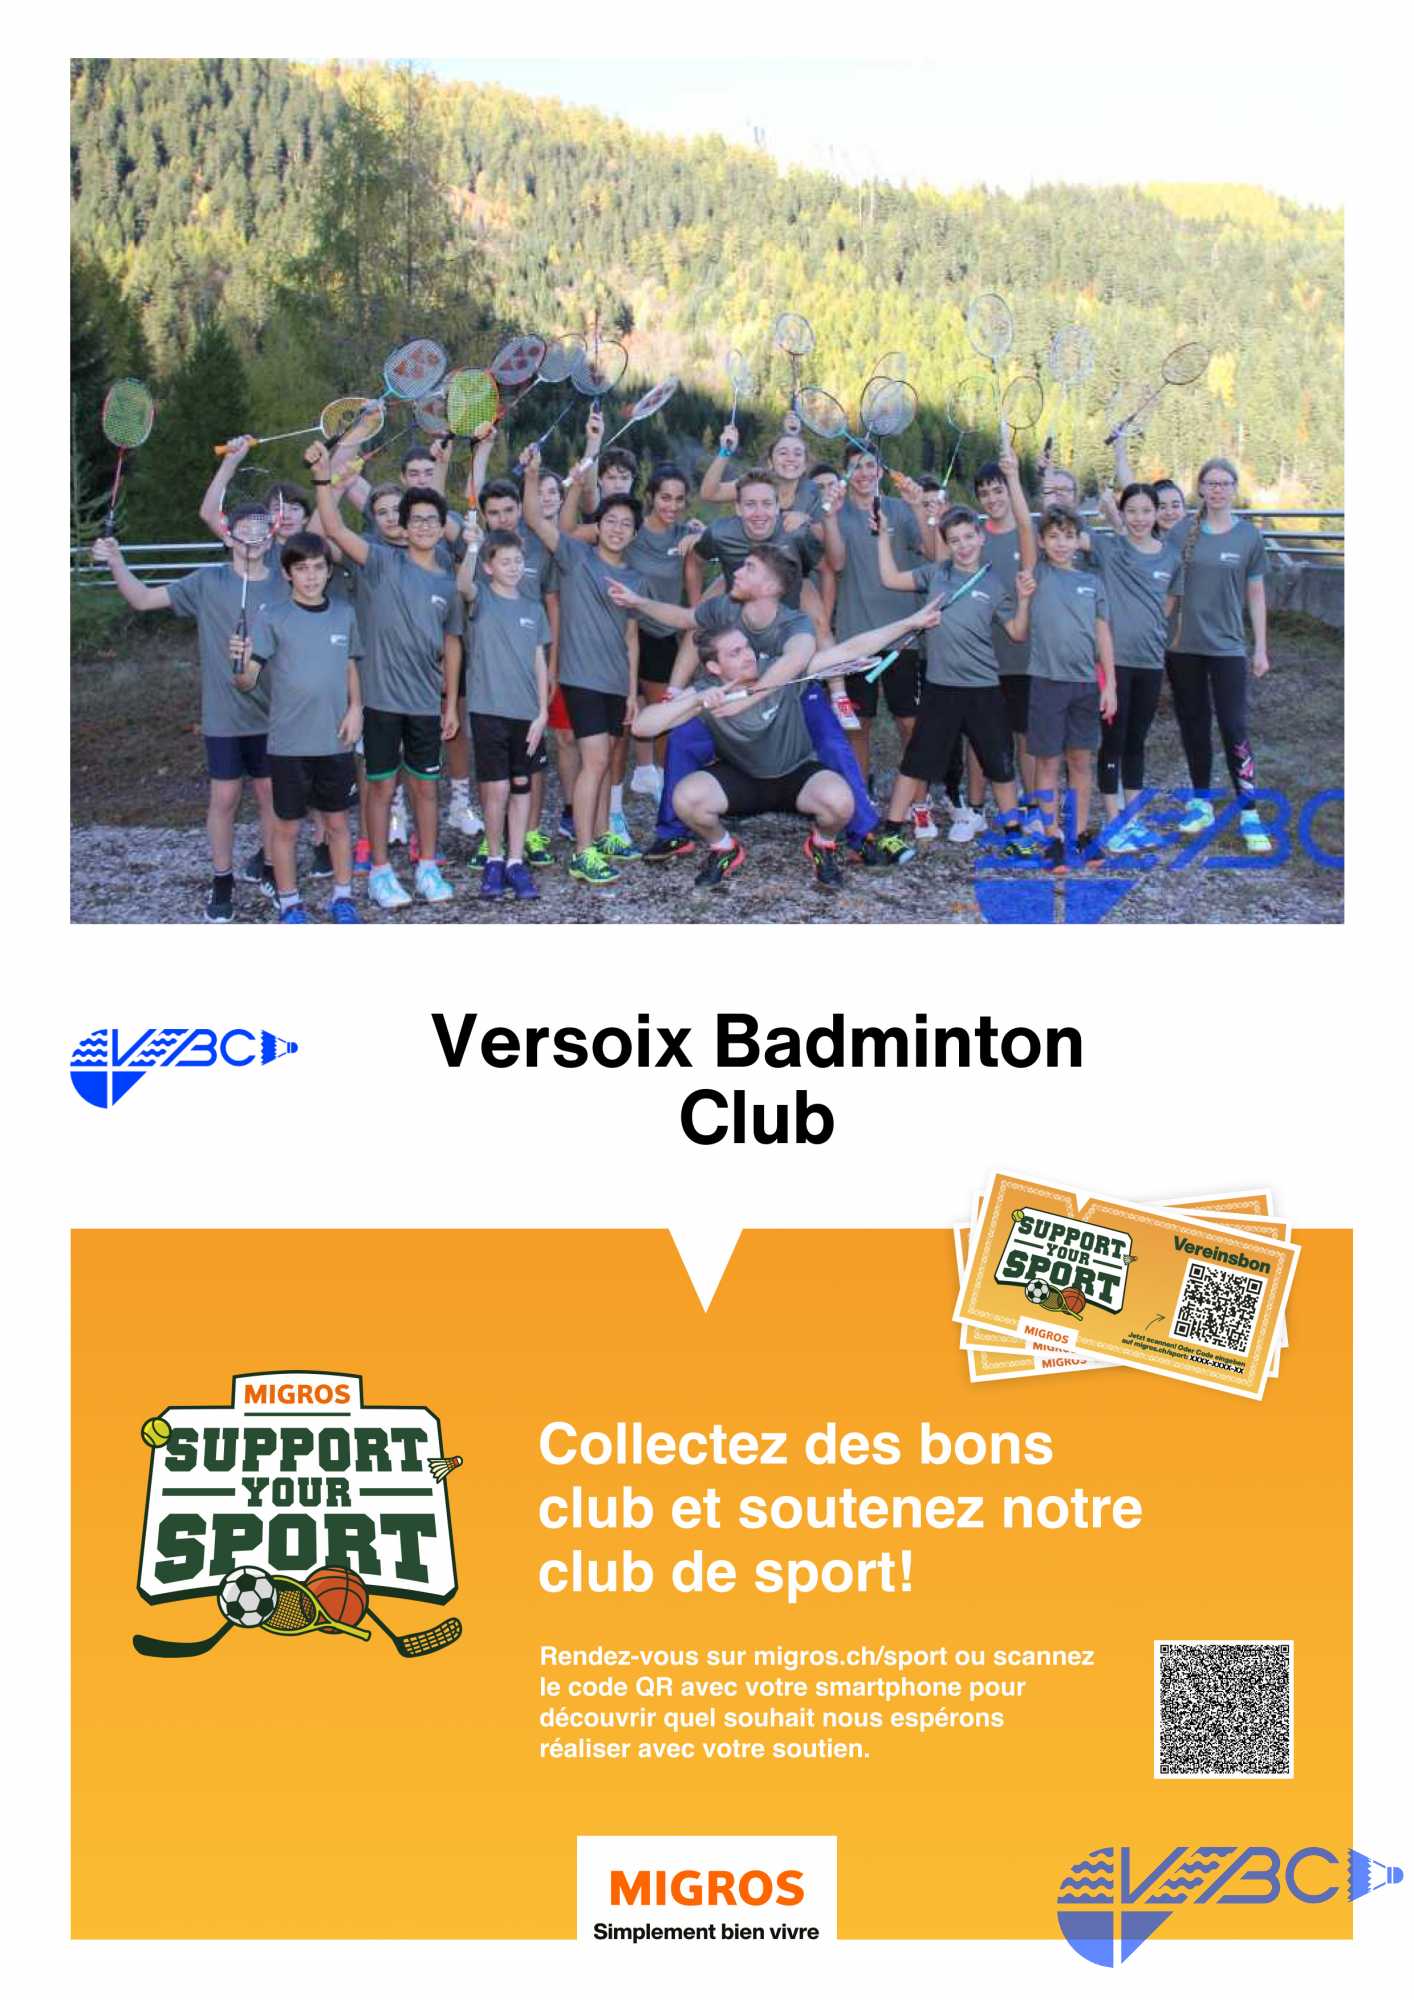 https://supportyoursport.migros.ch/fr/clubs/versoix-badminton-club/